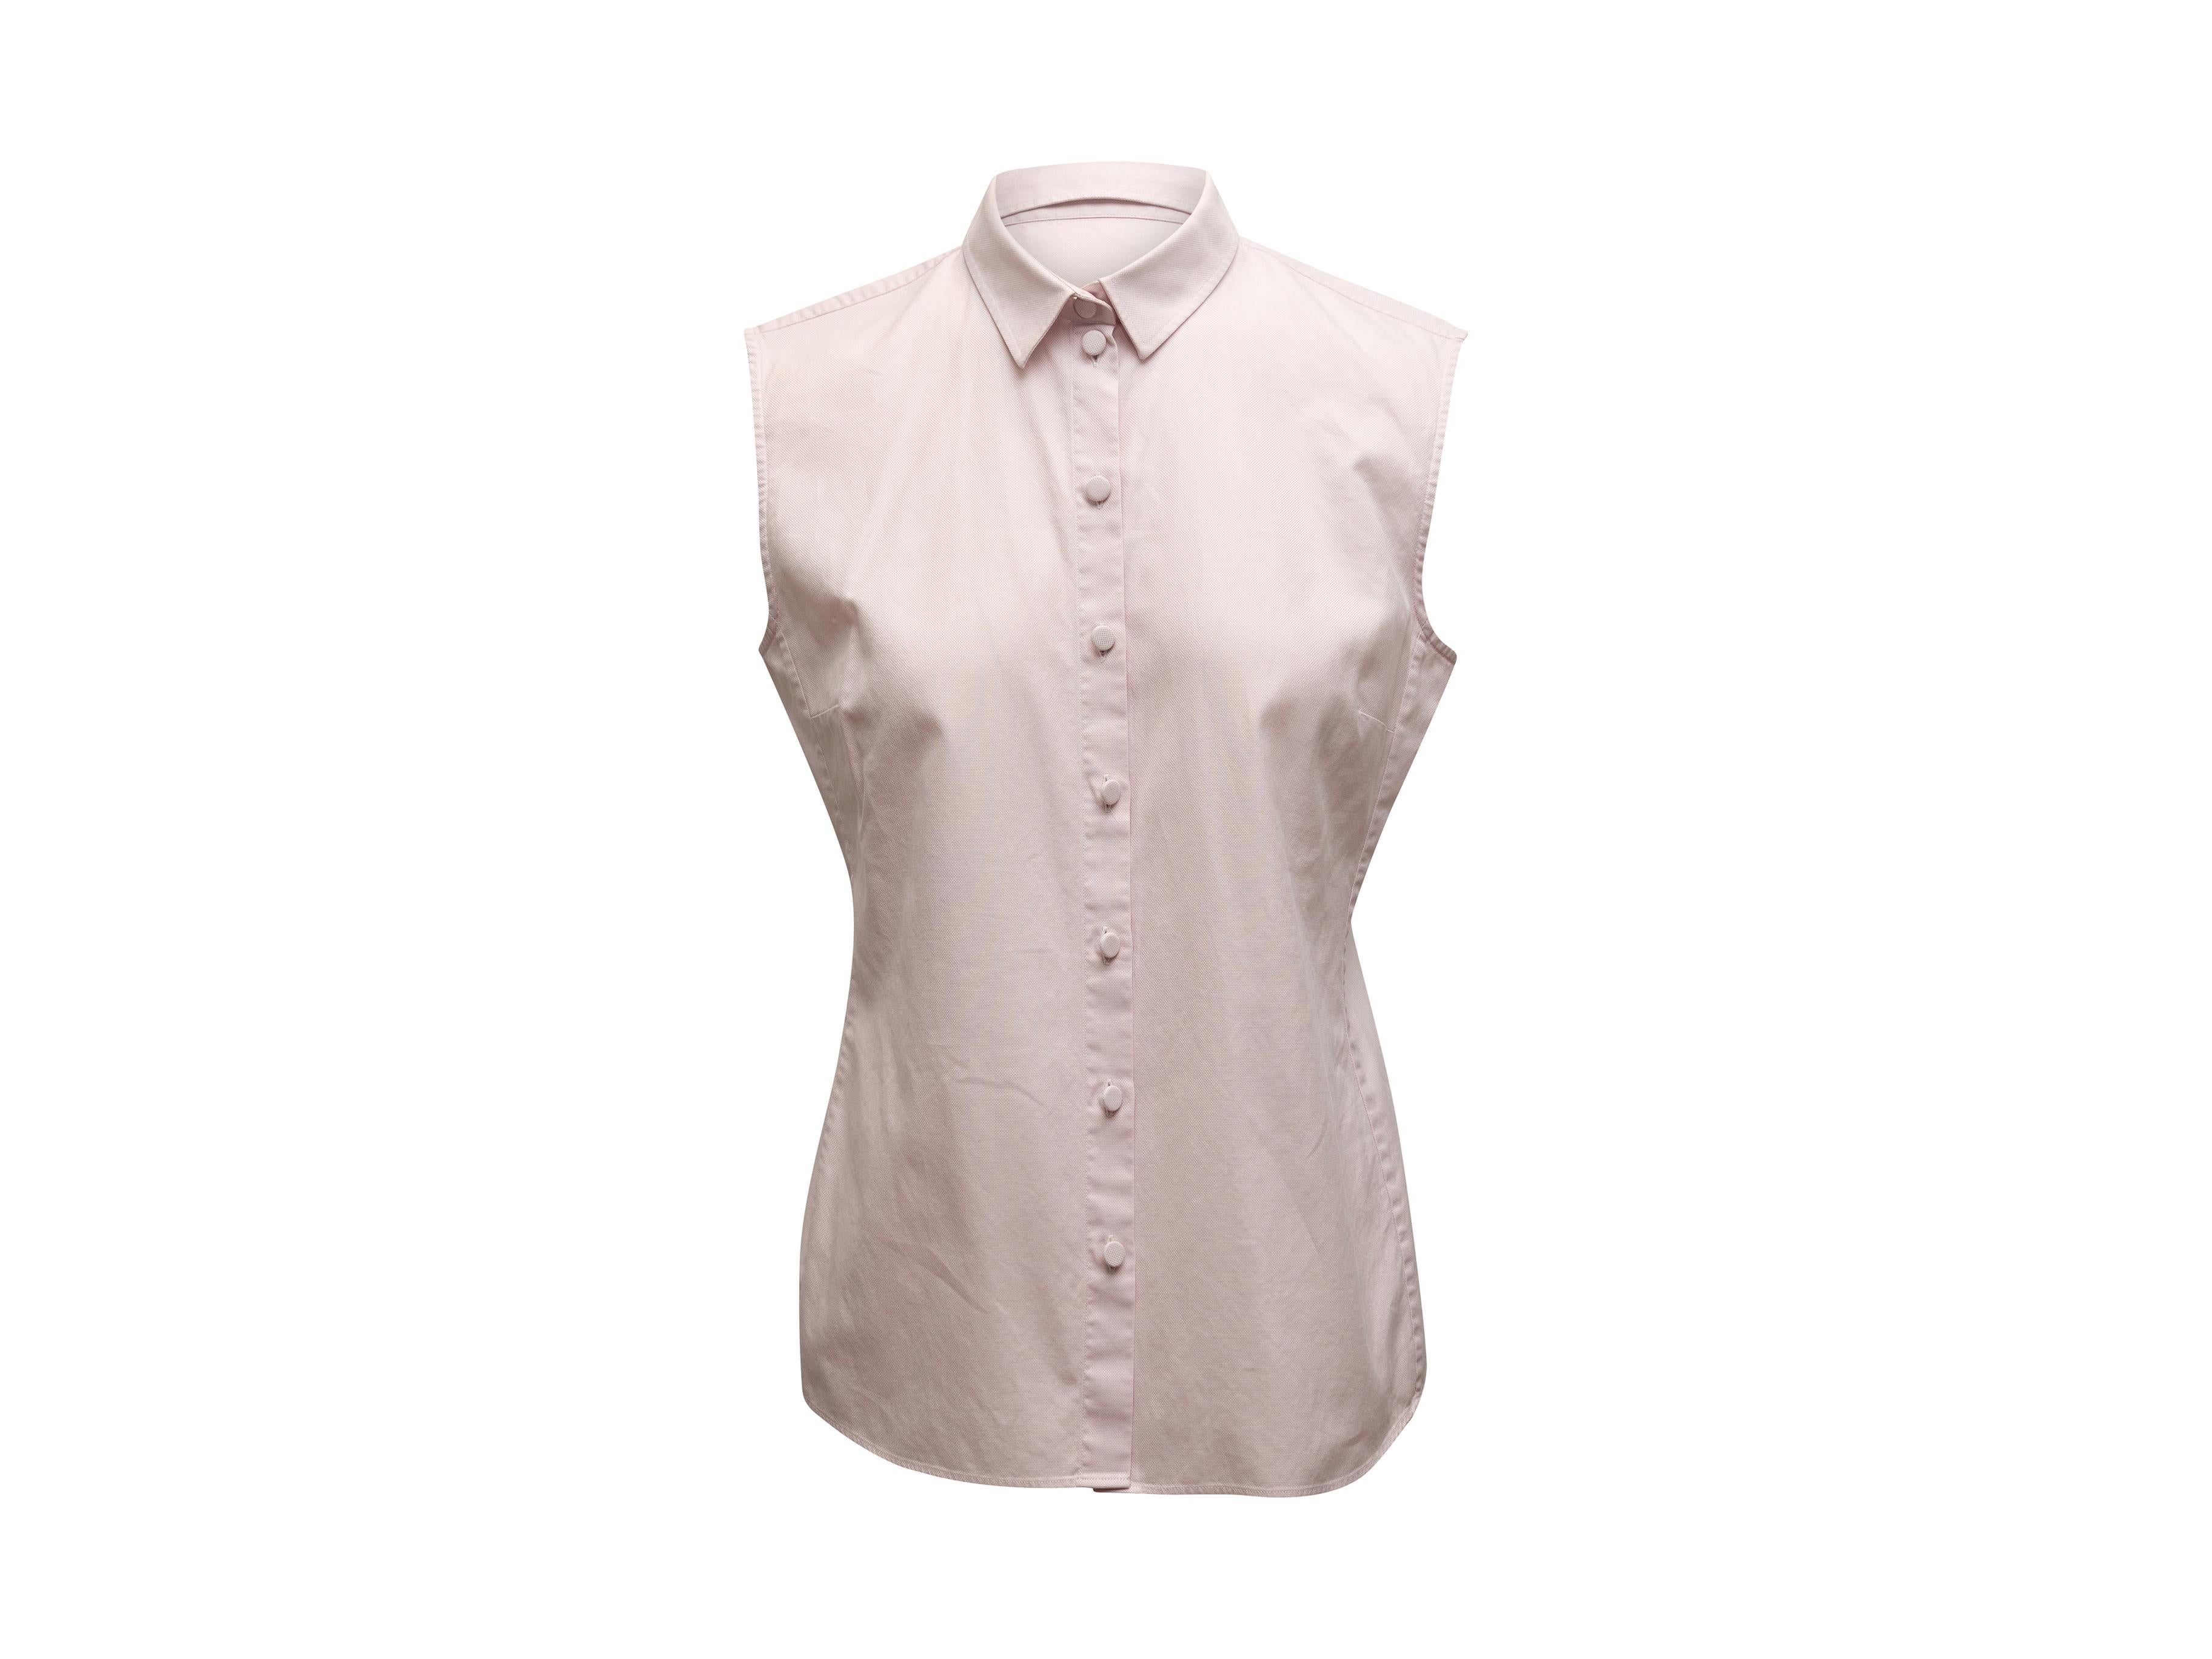 Product details: Light pink sleeveless button-up top by Christian Dior. Pointed collar. Button closures at center front. 35